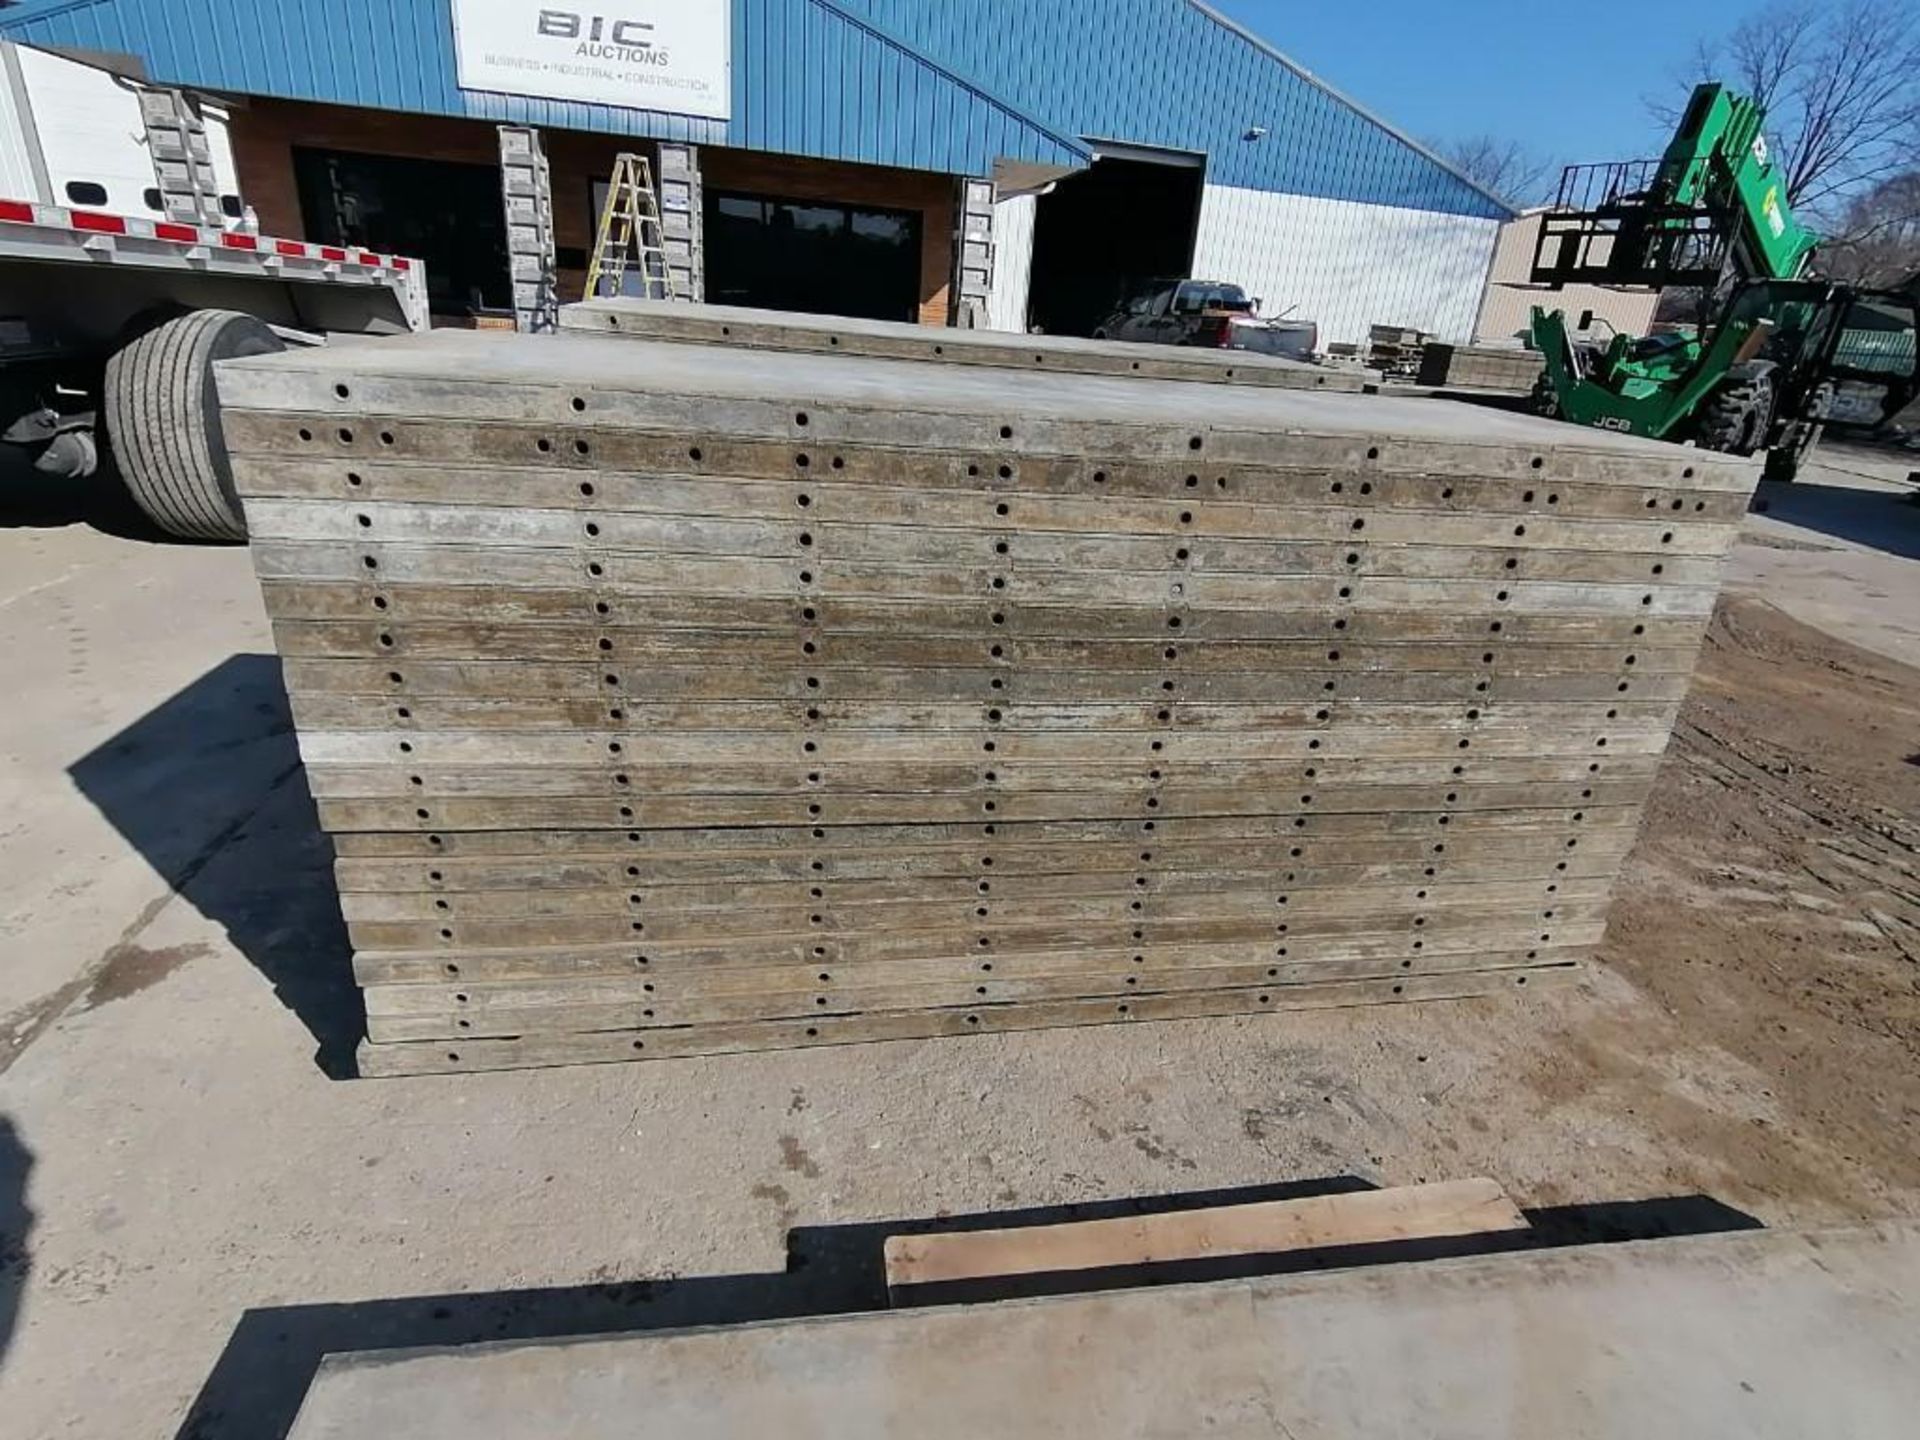 (20) 3' x 8' Wall-Ties Smooth Aluminum Concrete Forms 6-12 Hole Pattern. Located in Mt. Pleasant, - Image 6 of 8